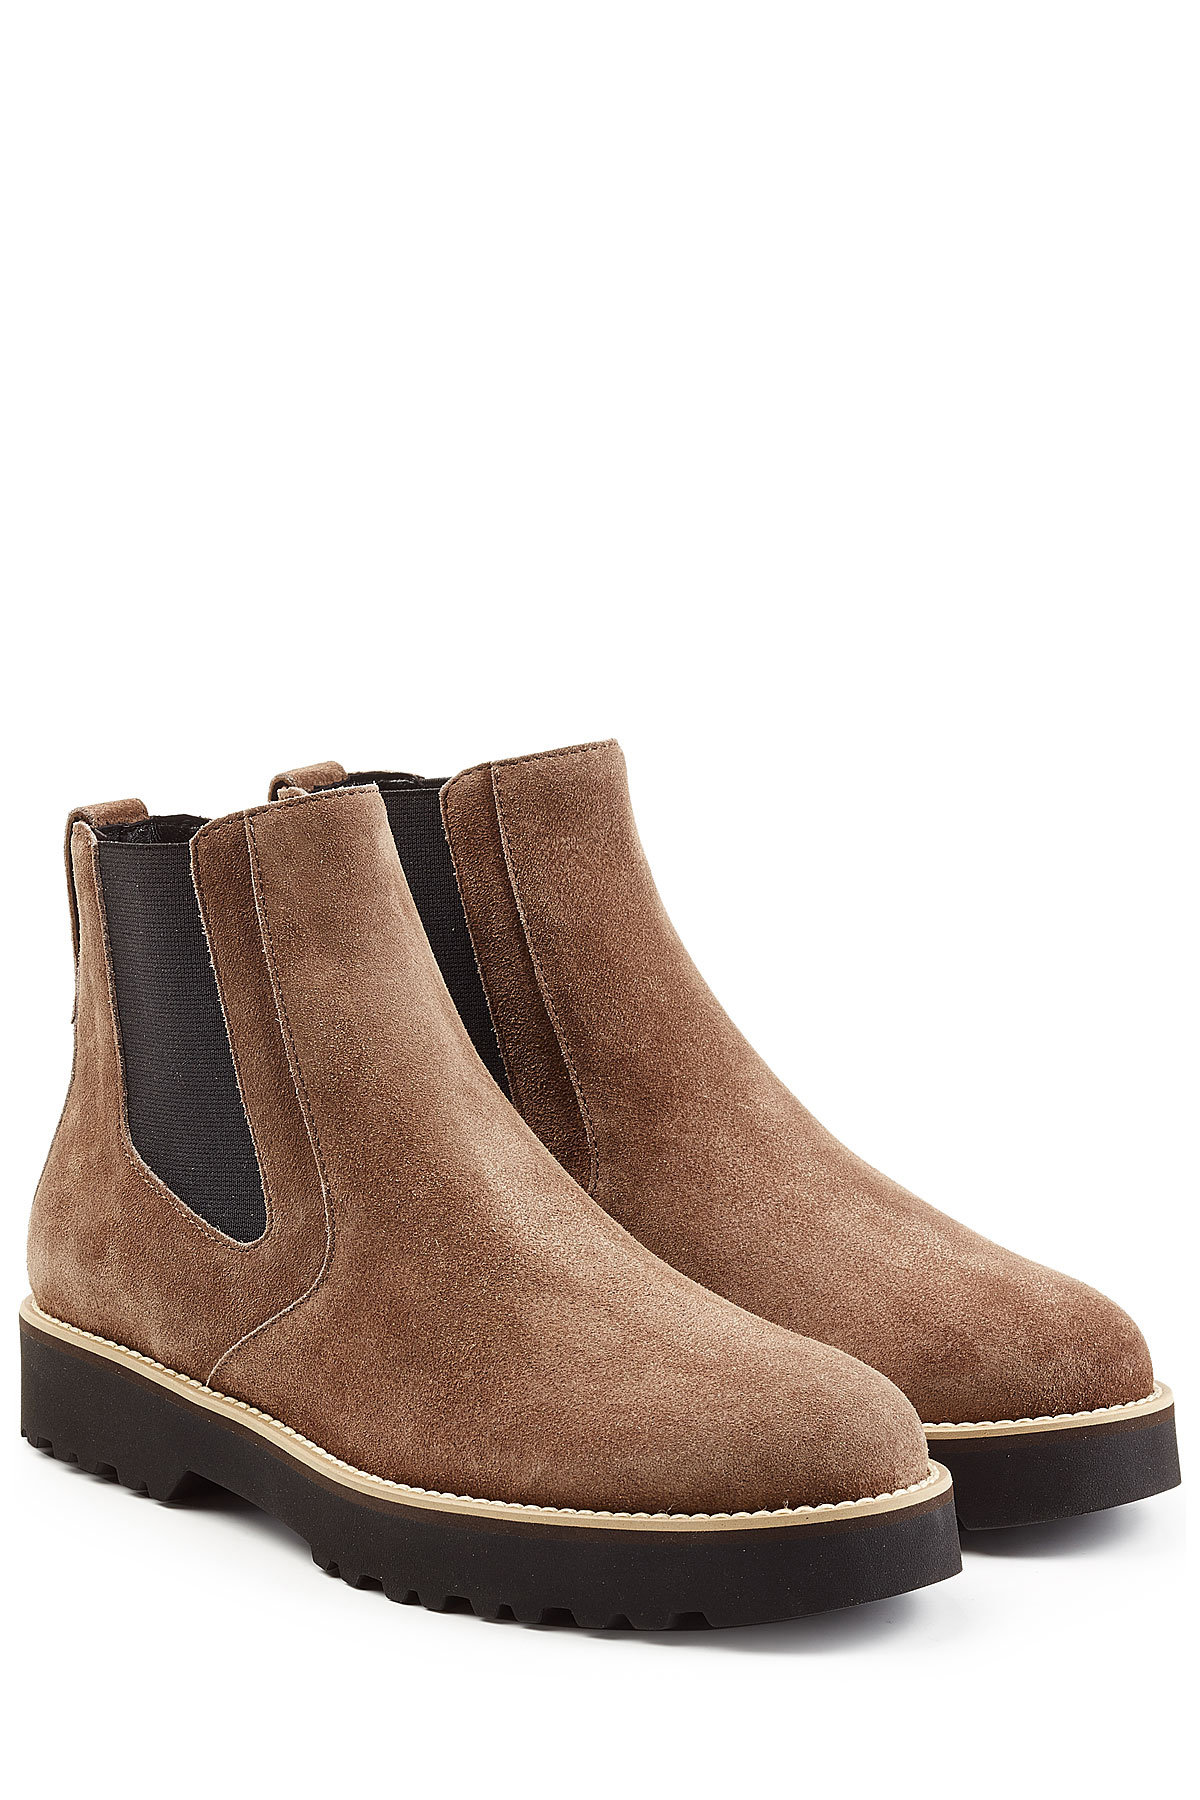 Suede Chelsea Boots by Hogan